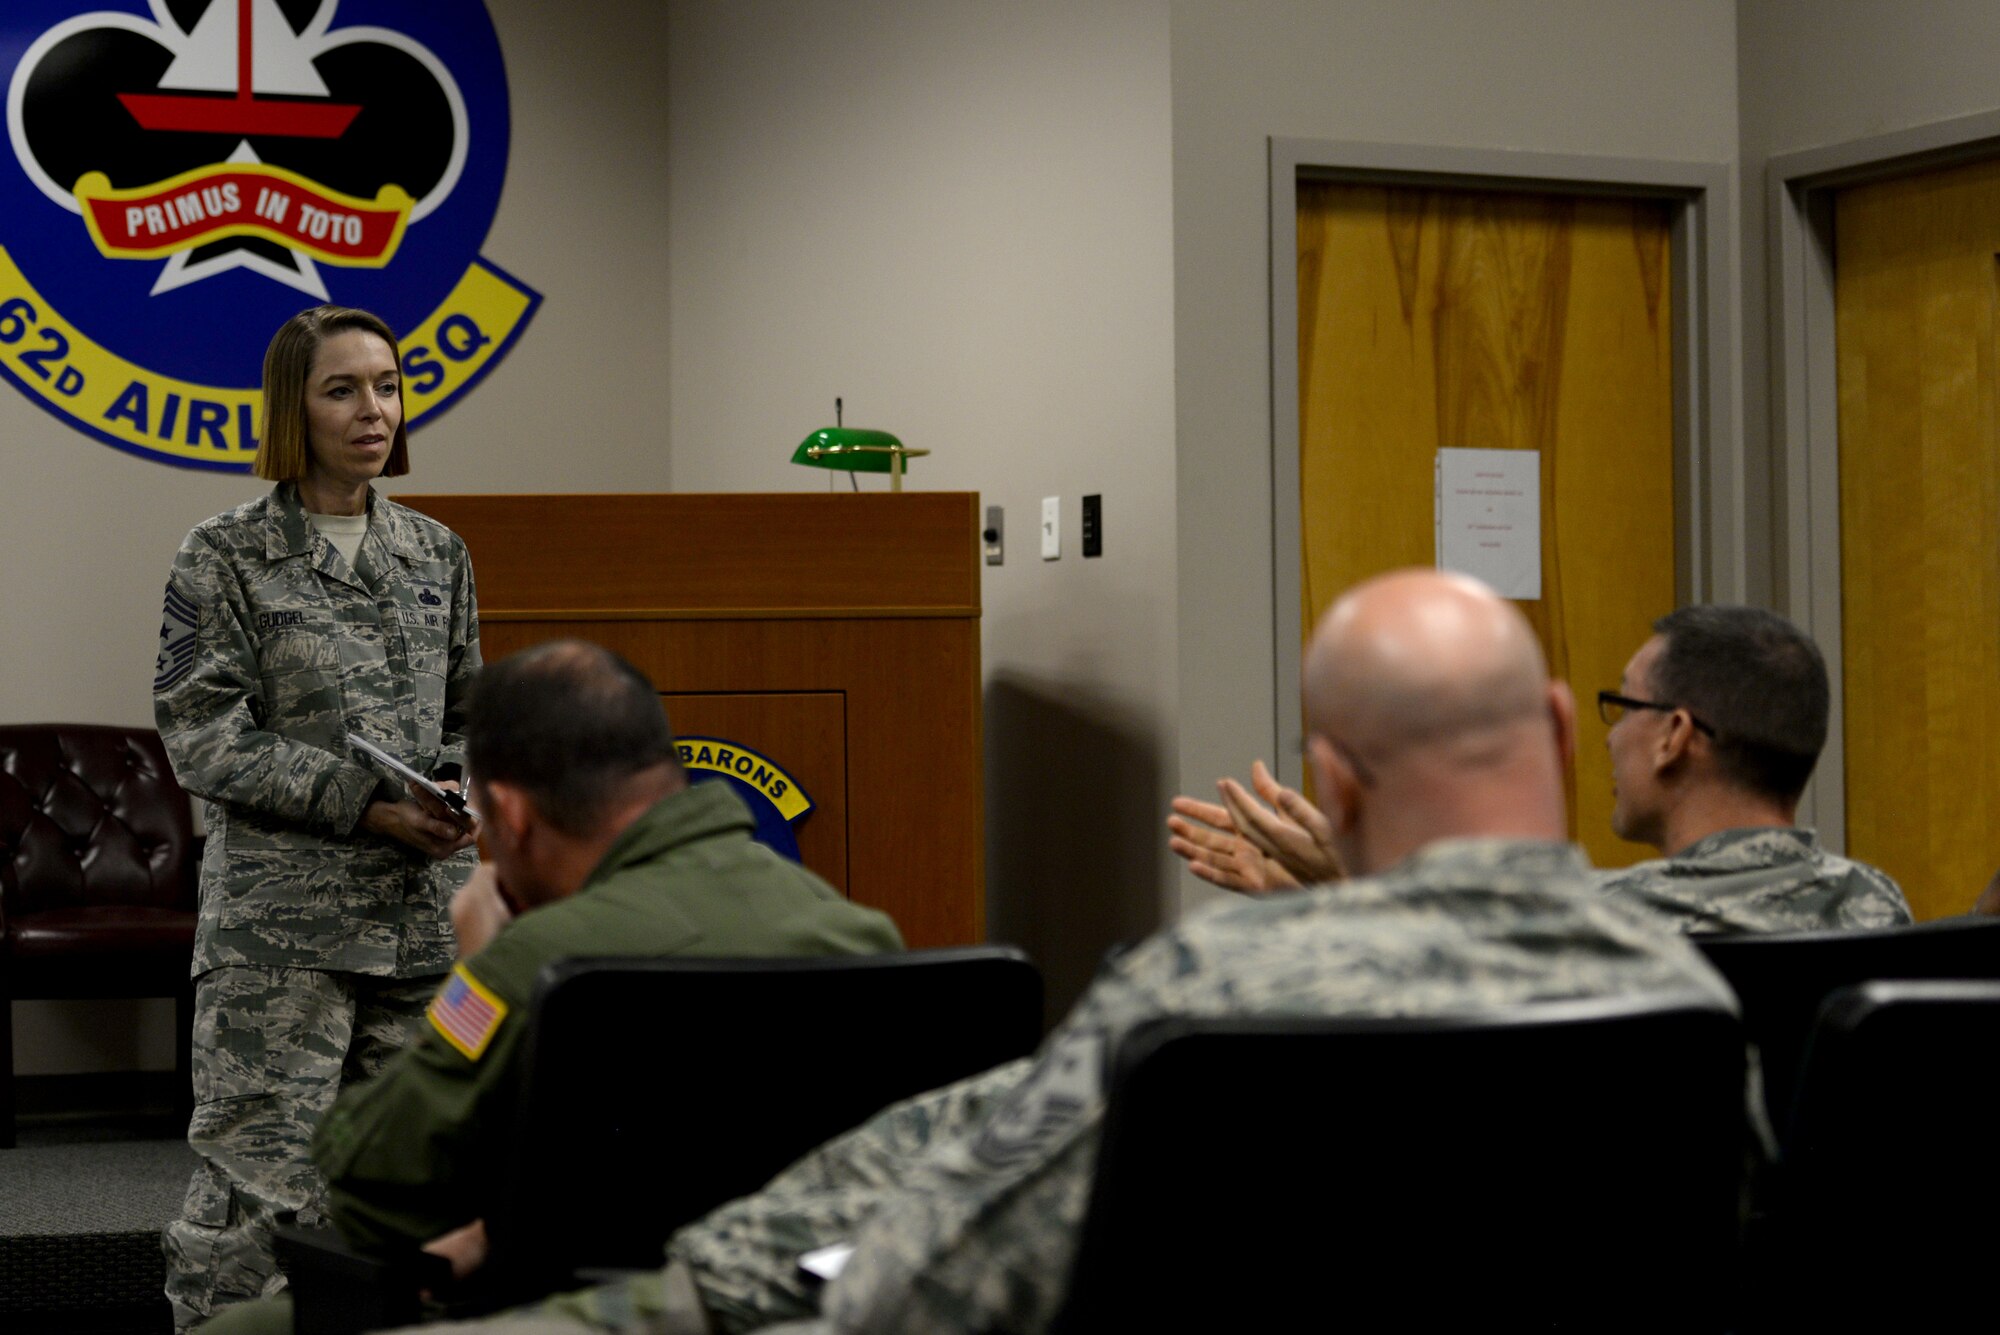 A woman in the Airman Battle Uniform looks at a man speaking to her as she stands in front of a room full seated individuals wearing ABUs.